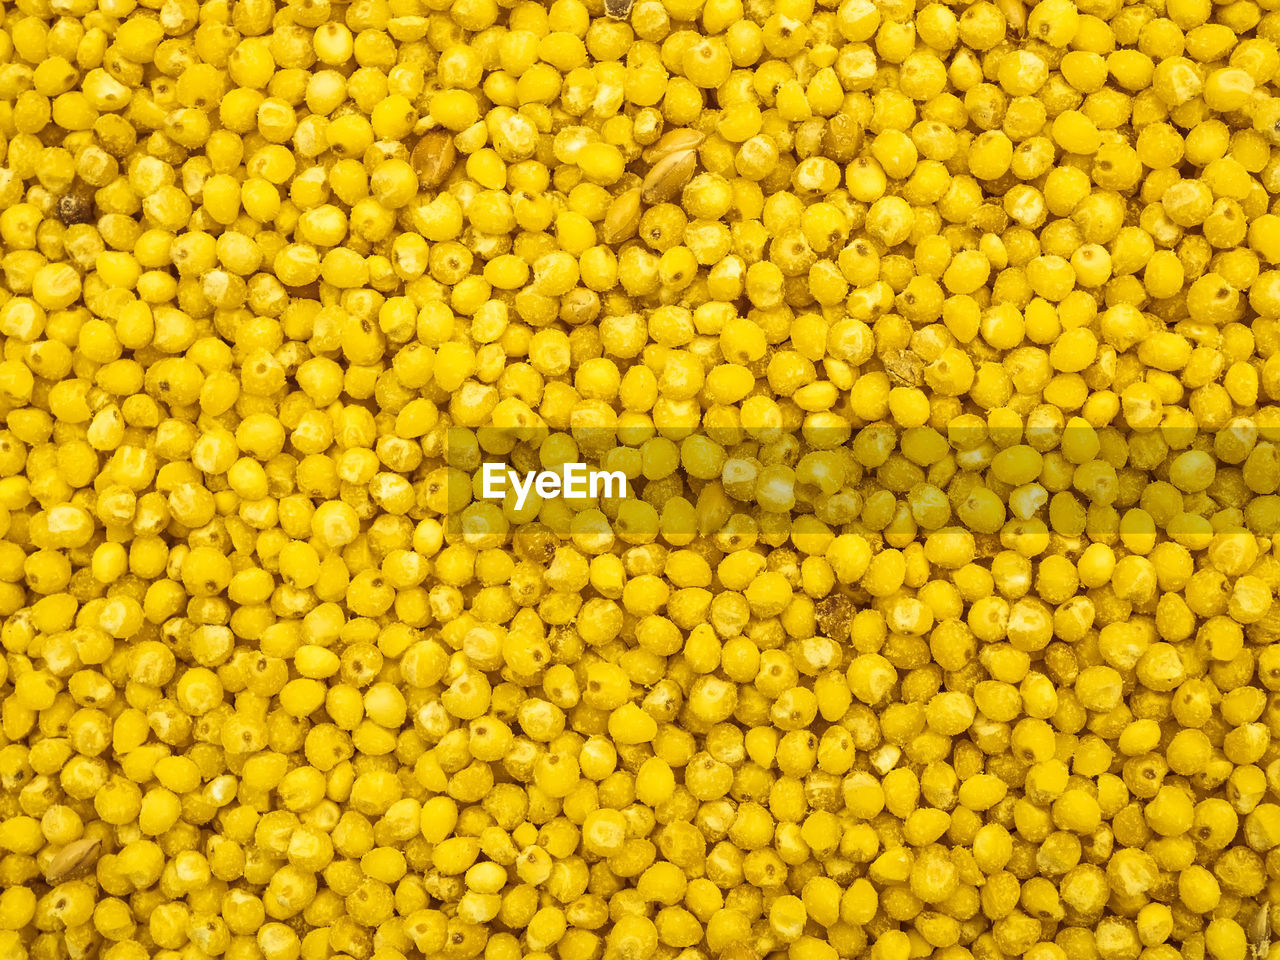 full frame, backgrounds, crop, abundance, yellow, freshness, large group of objects, produce, food, plant, food and drink, no people, pollen, agriculture, vegetable, healthy eating, wellbeing, close-up, textured, high angle view, corn kernels, nature, repetition, raw food, pattern, flower, day